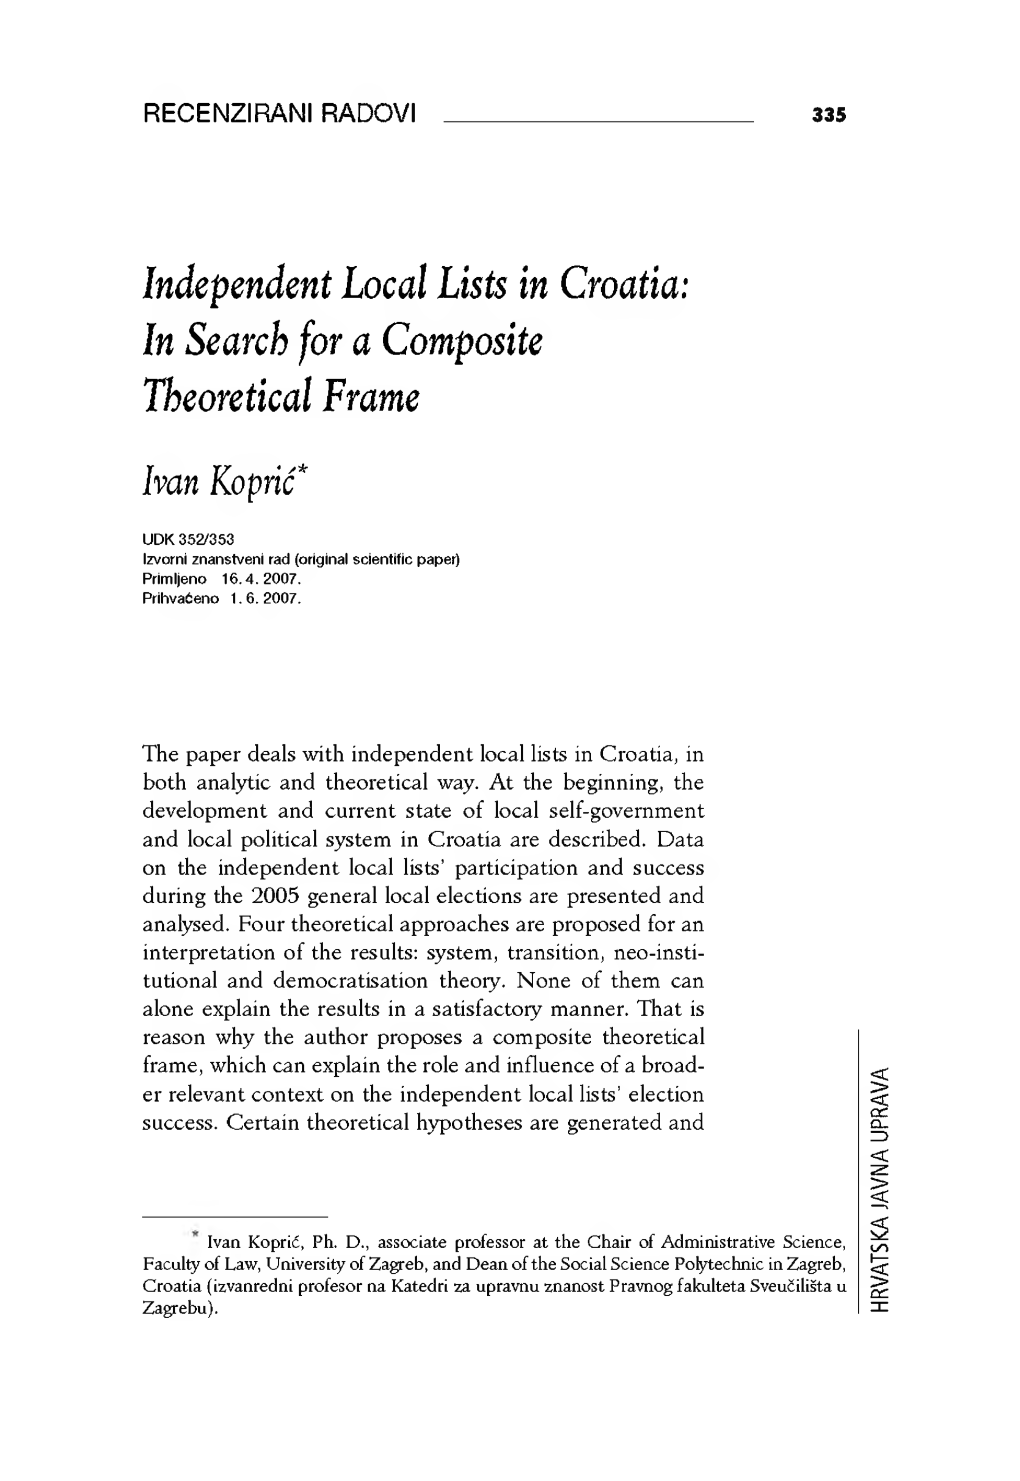 Independent Local Lists in Croatia: in Search for a Composite Theoretical Frame Ivan Koprić*